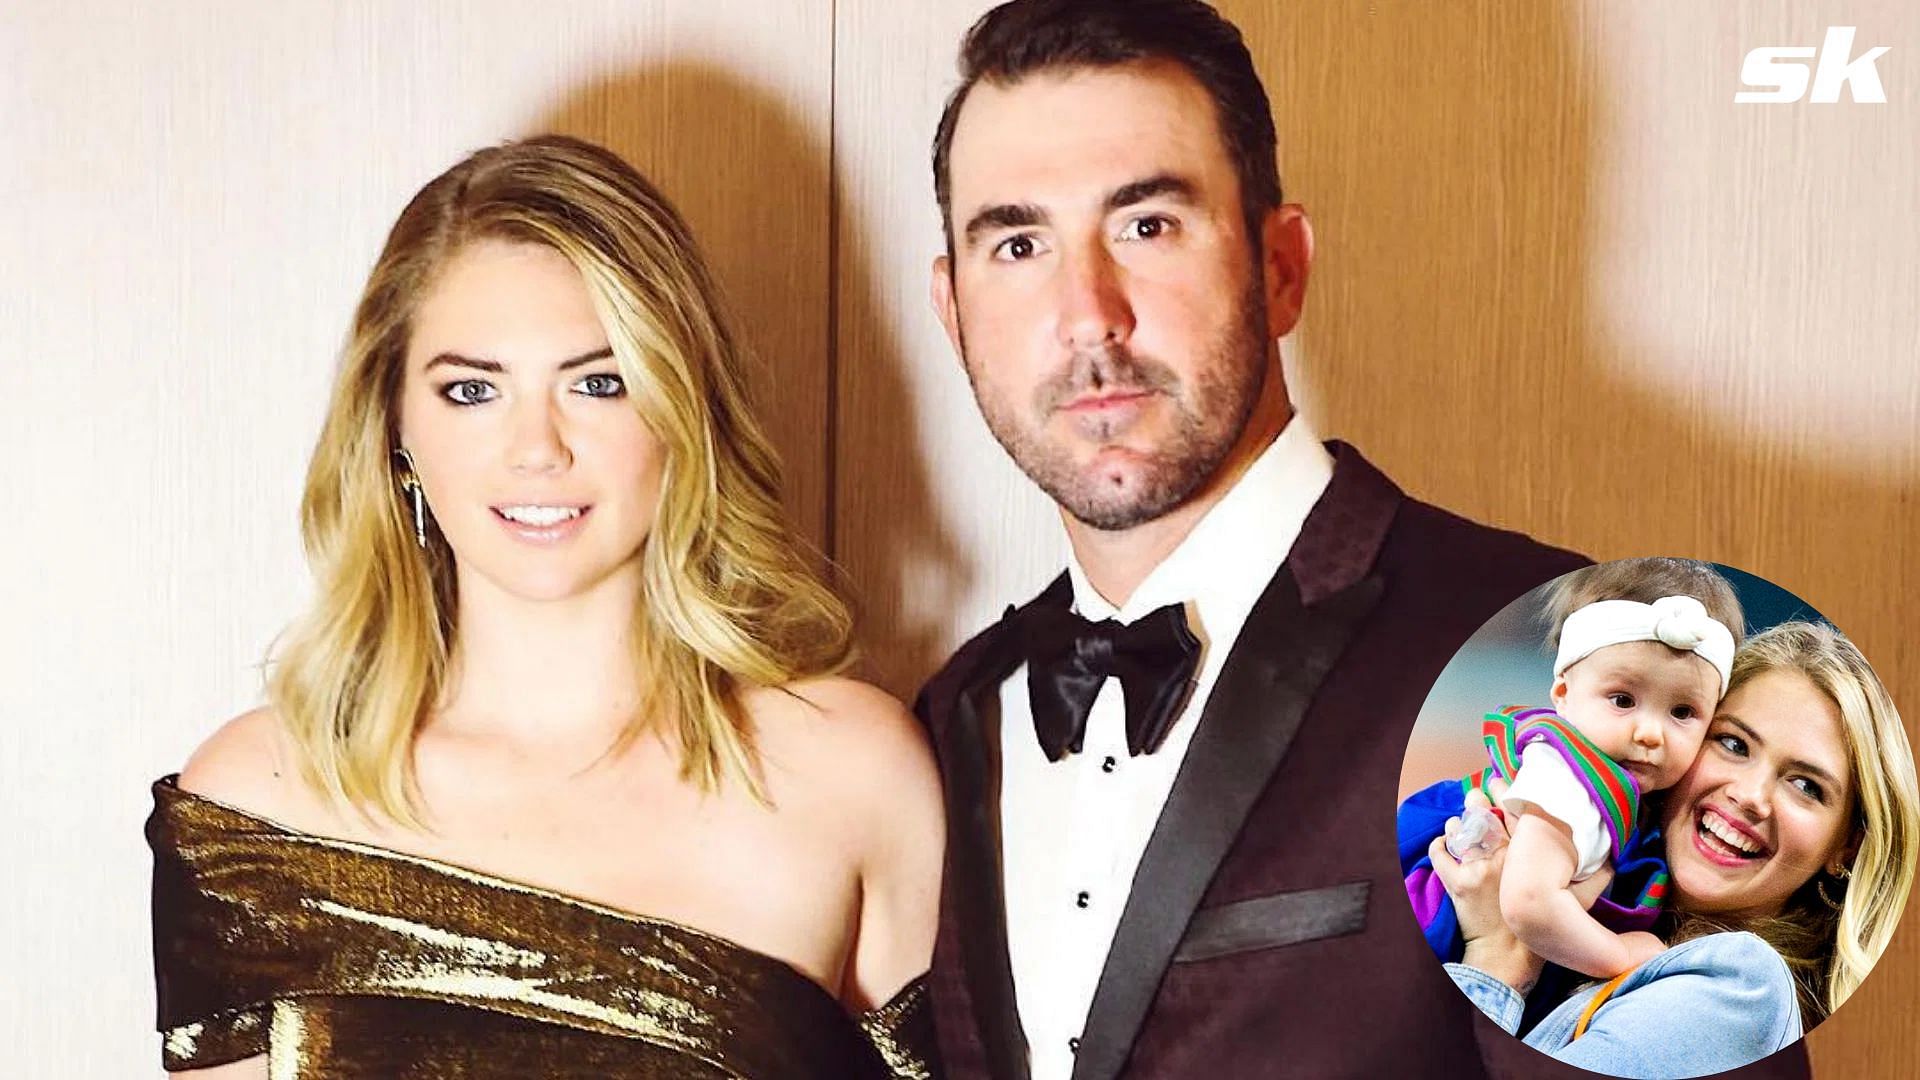 Kate Upton shares an adorable photo with her husband Justin